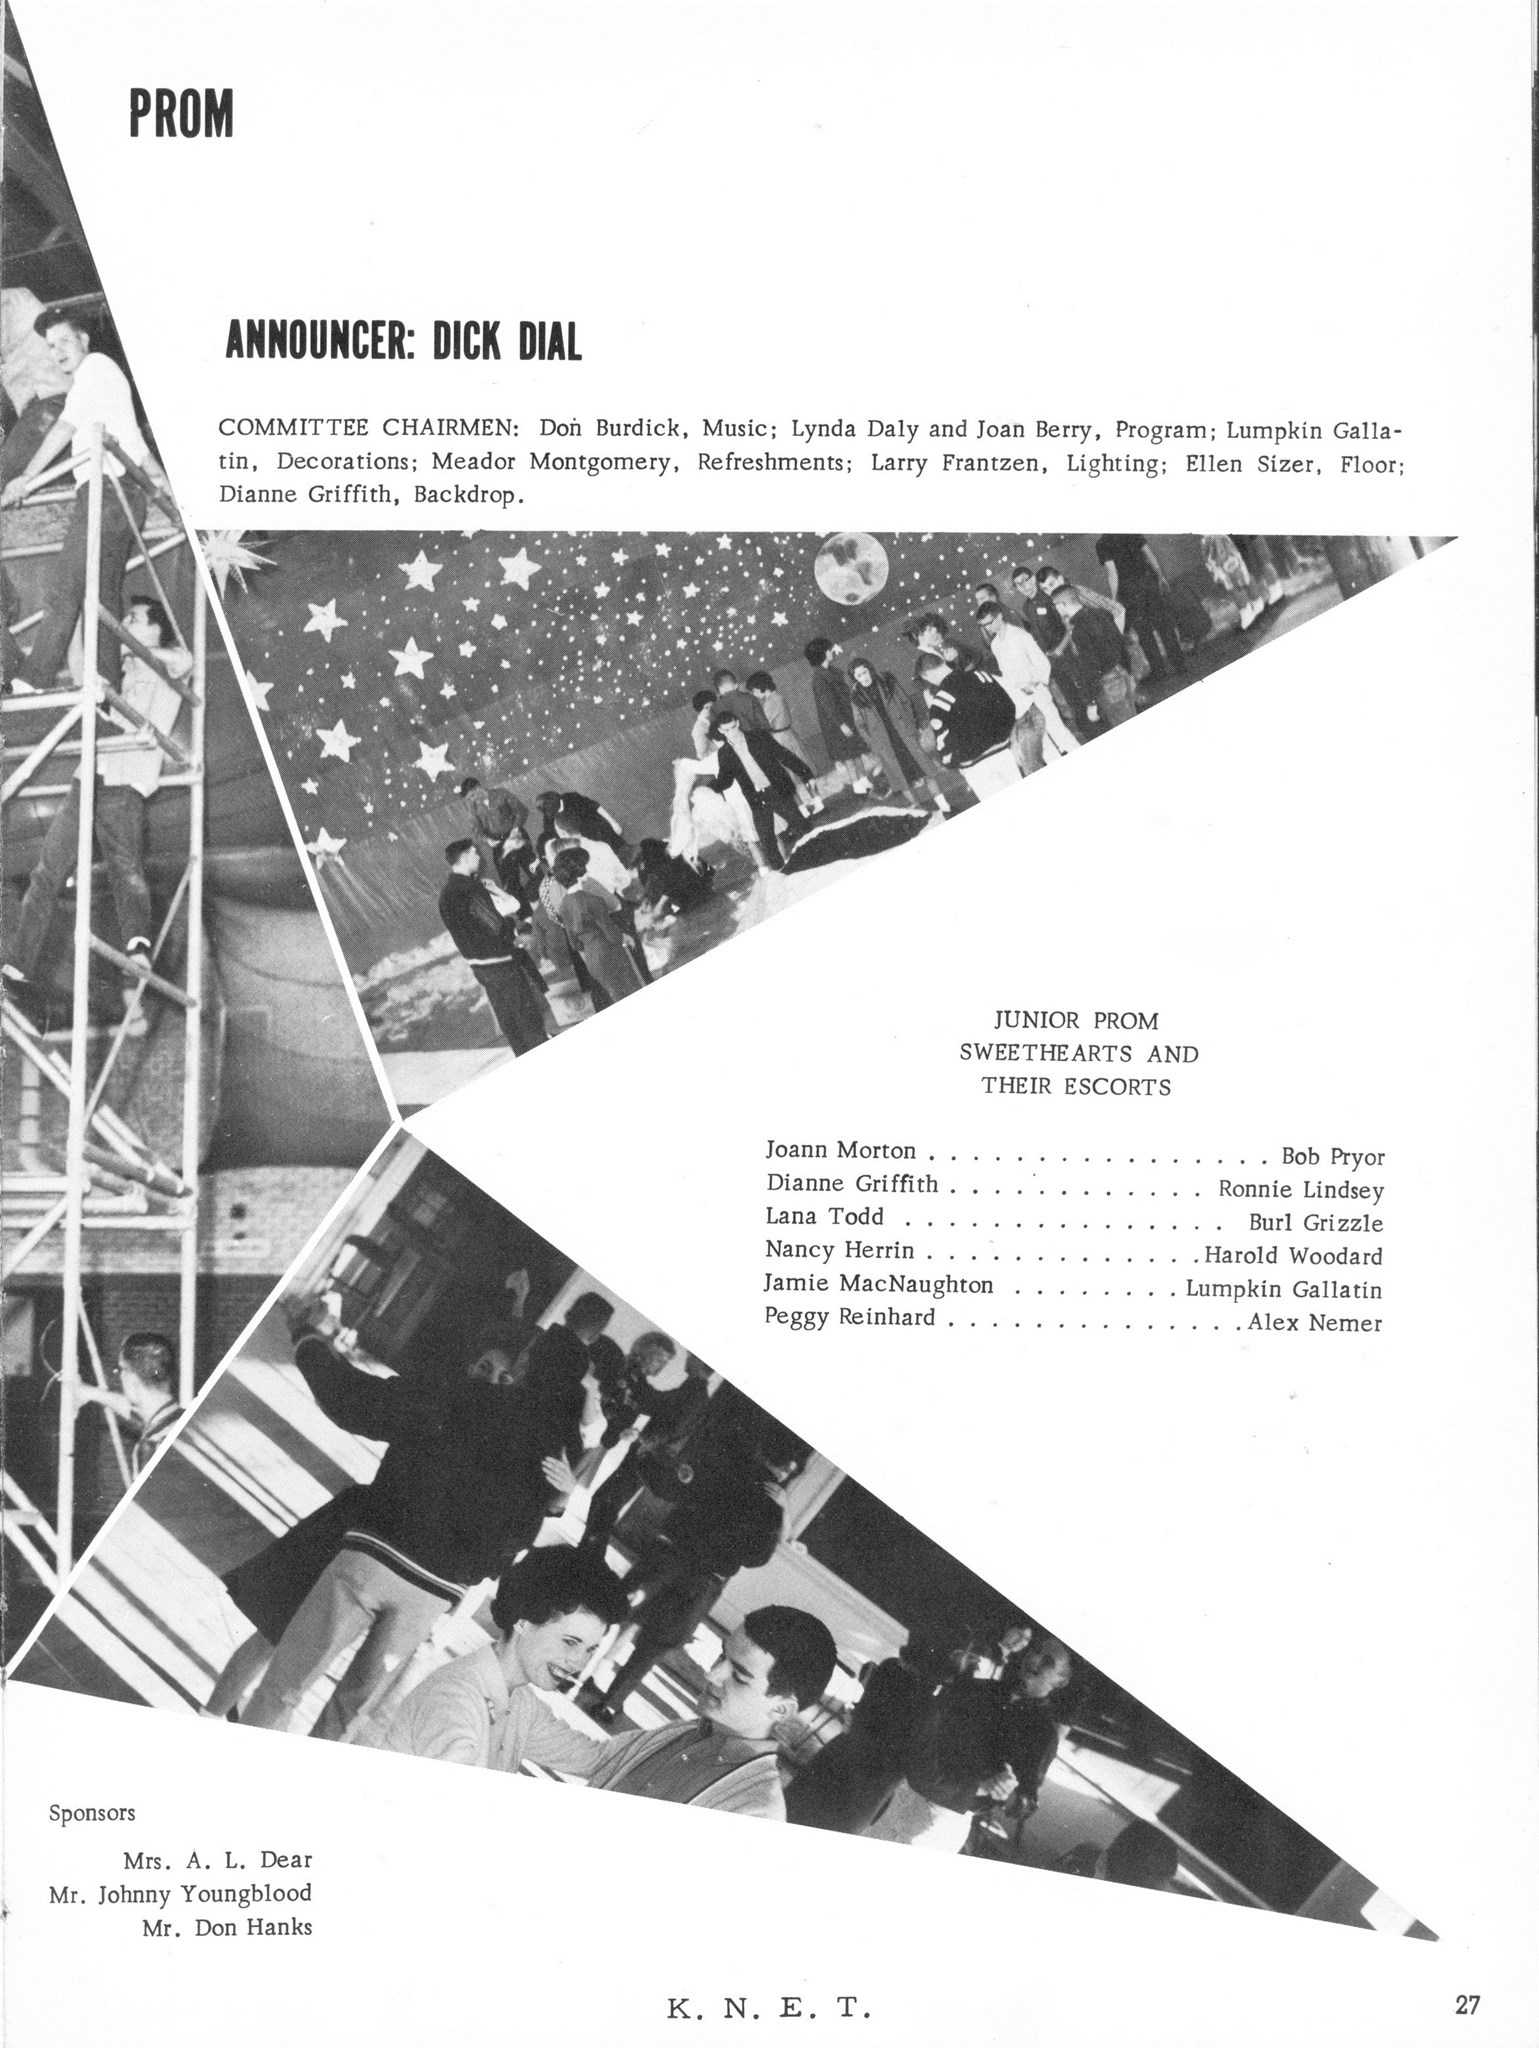 ../../../Images/Large/1963/Arclight-1963-pg0027.jpg